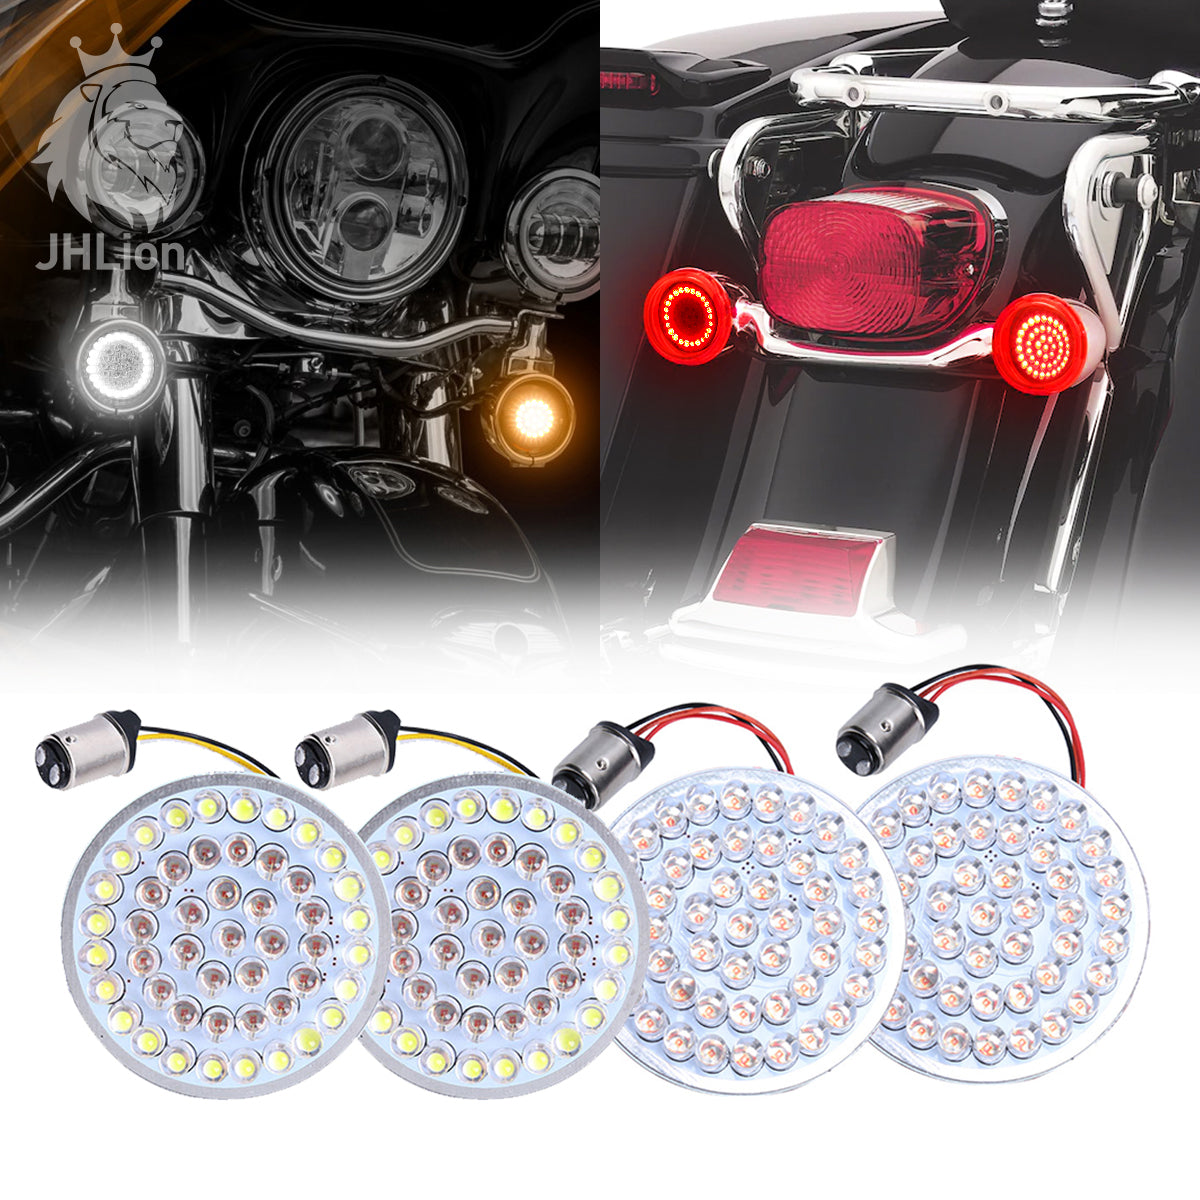 Lalaparts 4PCS 2 Bulet Style LED 1157 White Amber Red Turn Signal Running Brake Tail Front Rear Light Insert Bulb Compatible for Harley Touring Road King Street Glide 